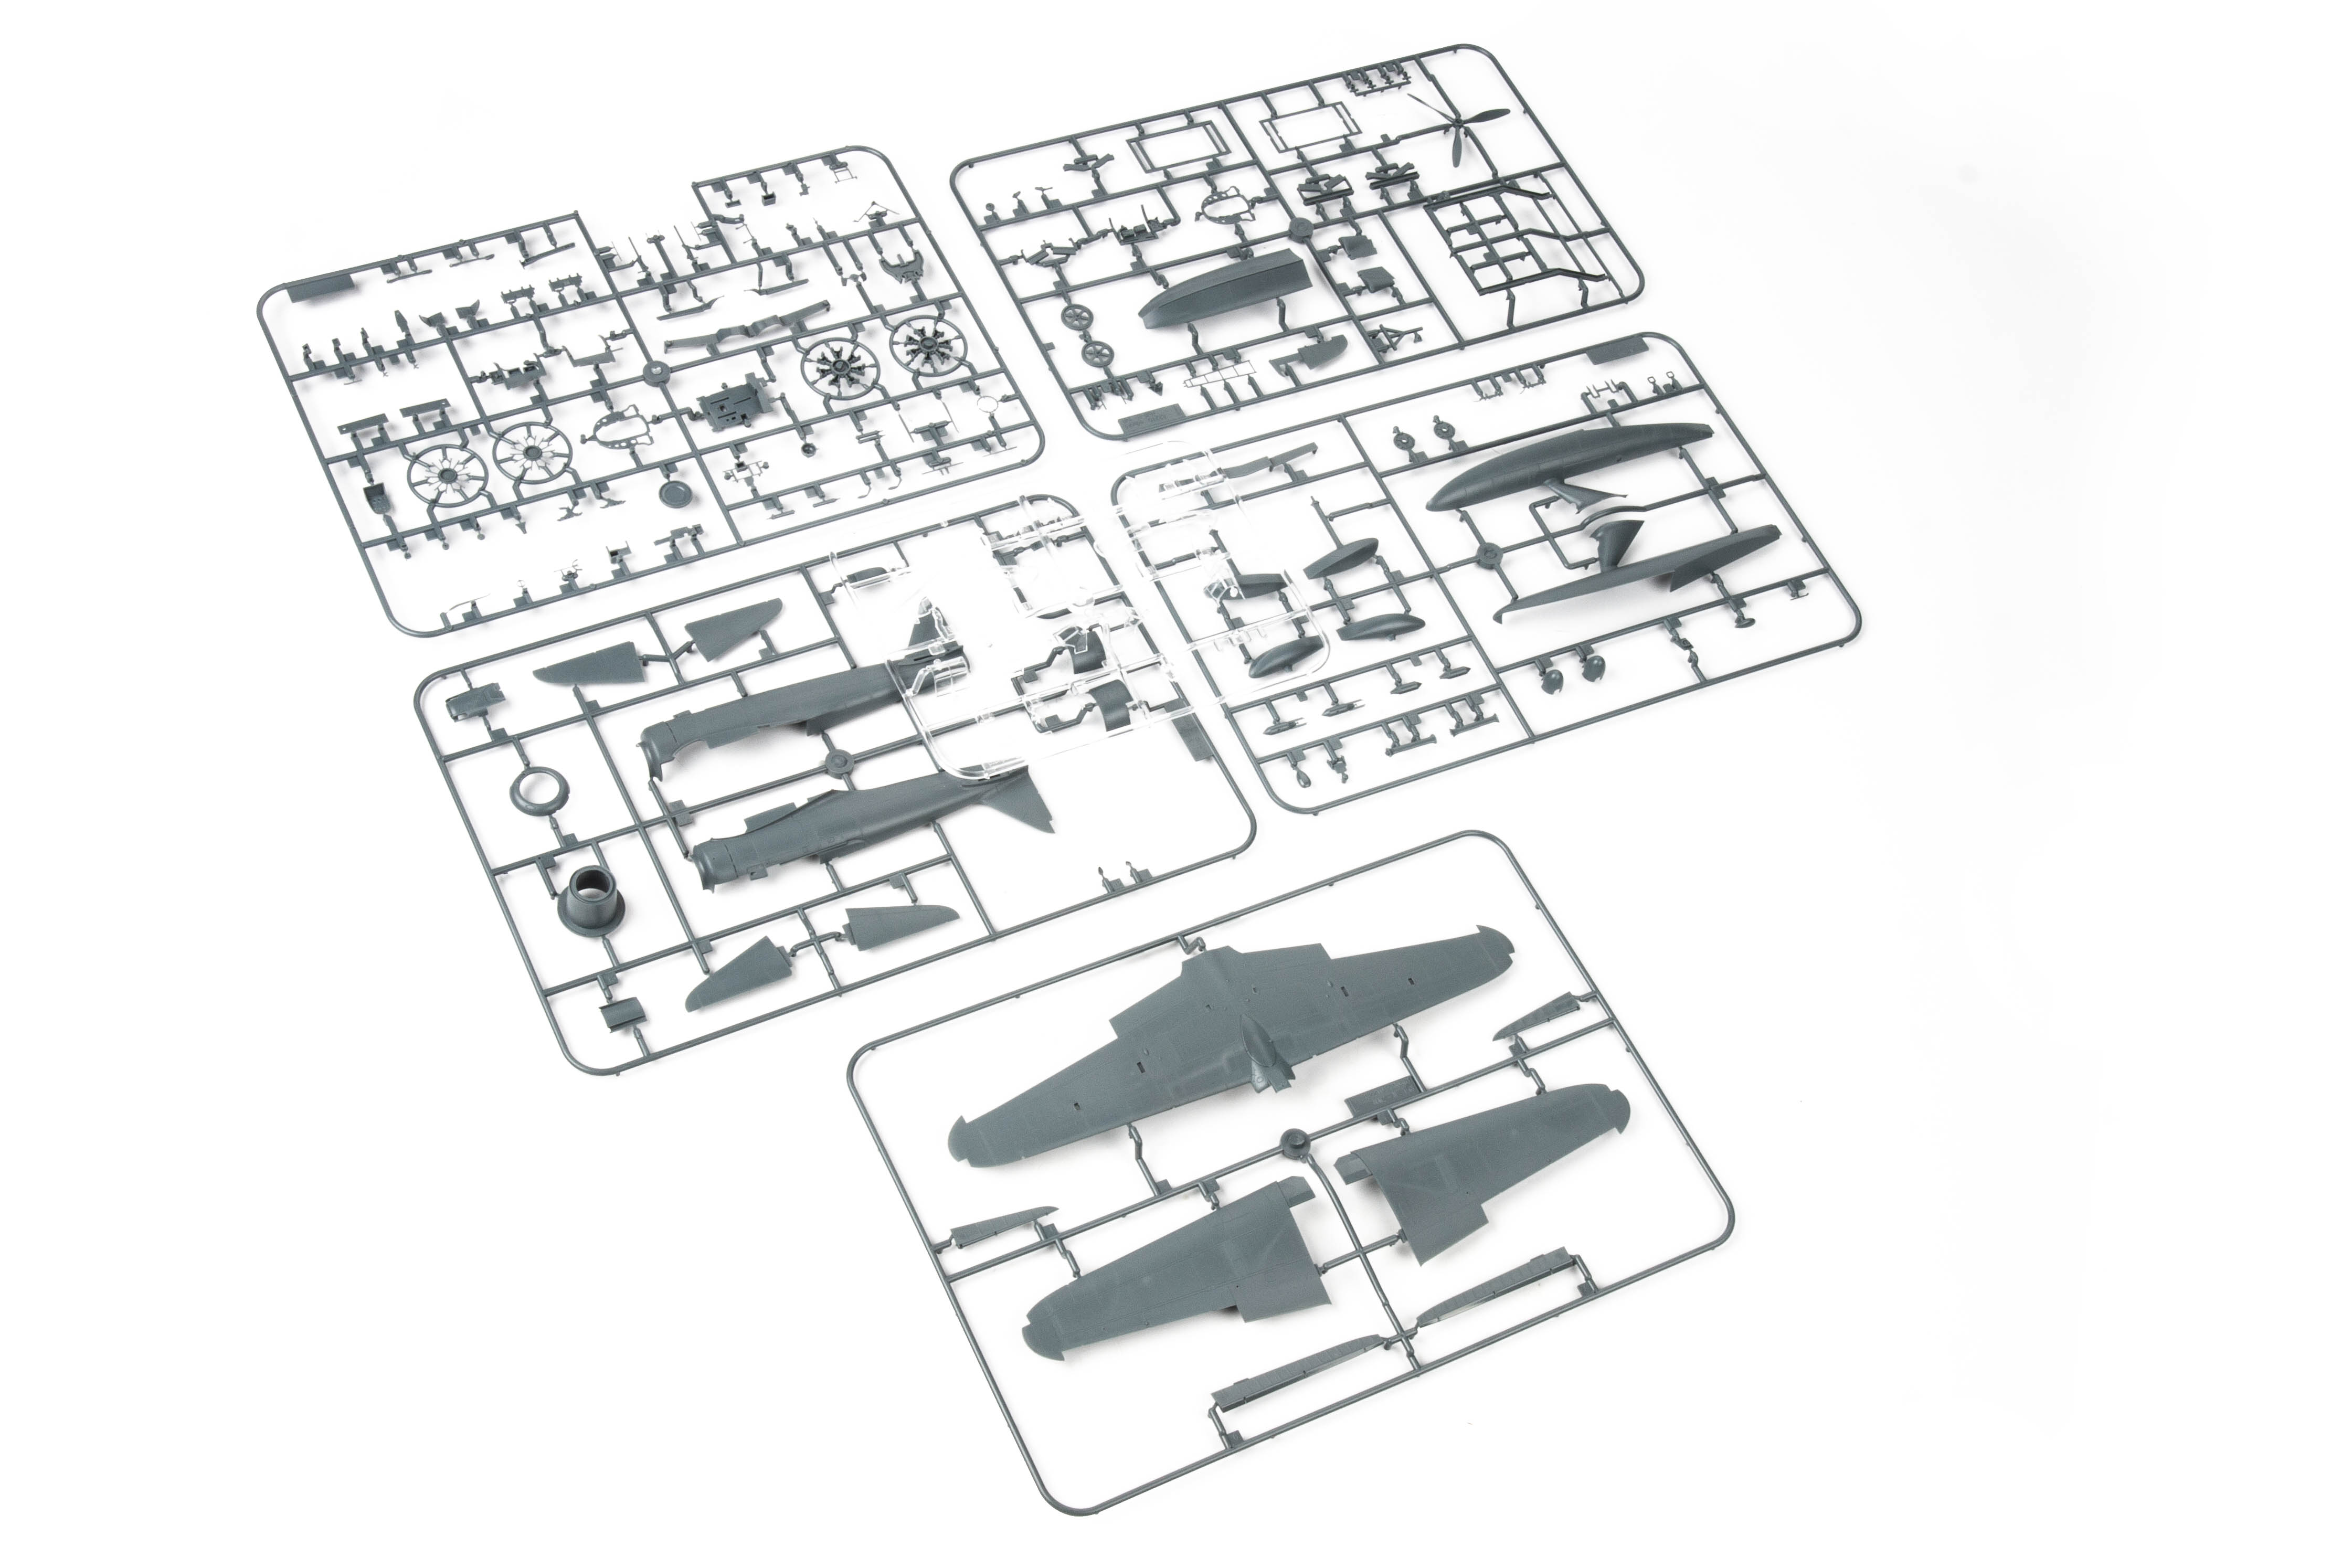 A6M2-N Rufe OVERTREES 1/48 - Eduard Store